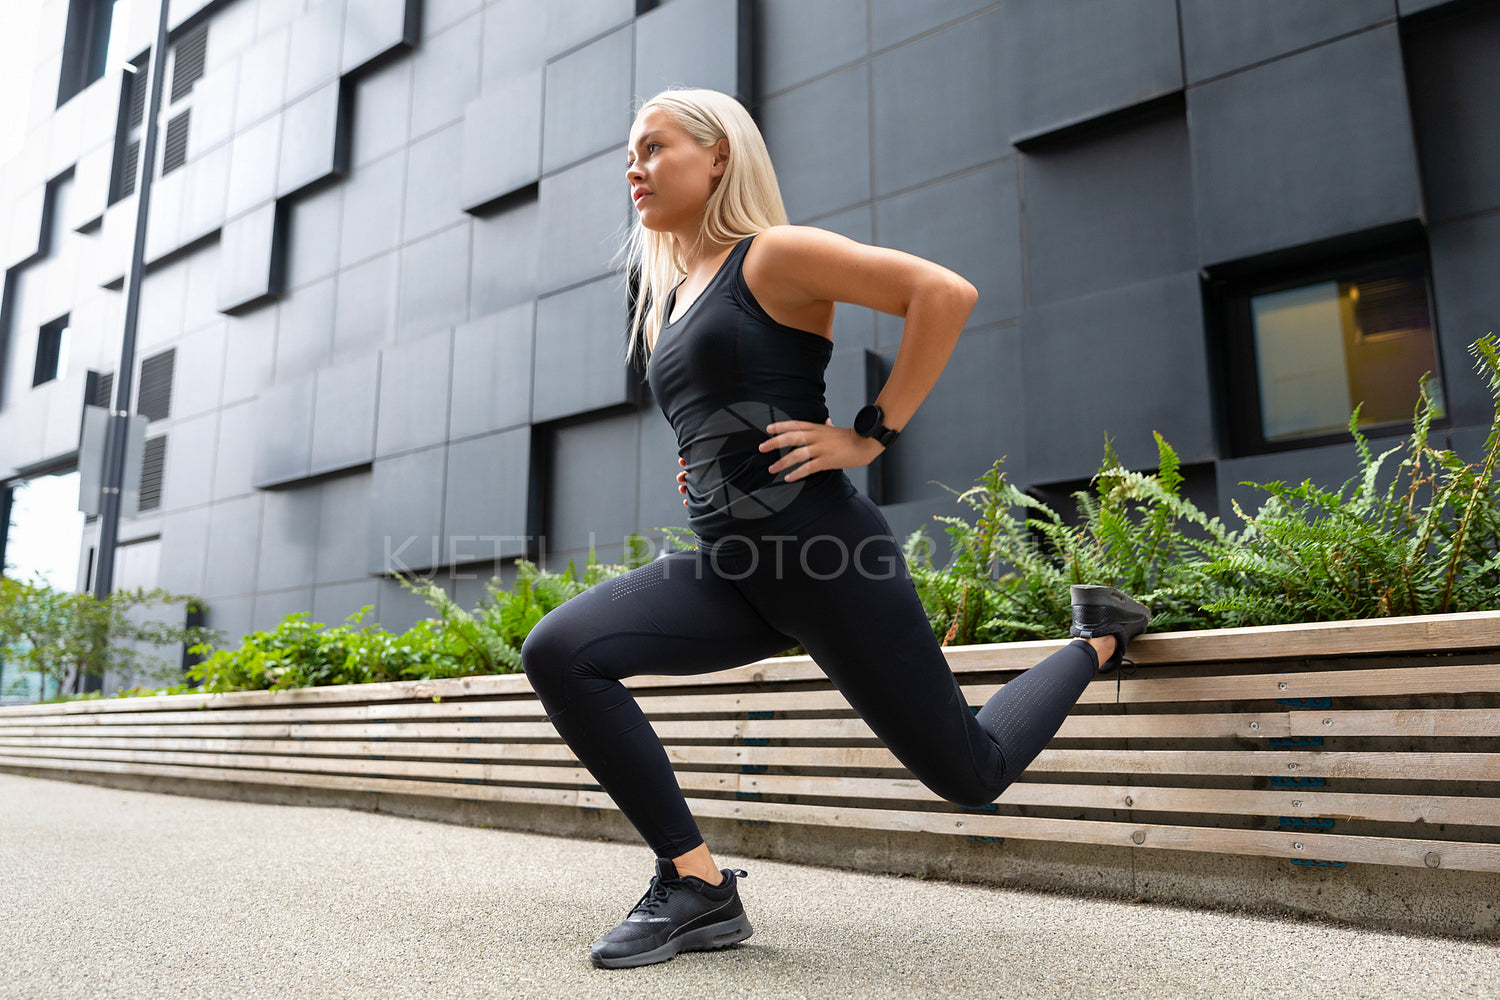 Close-up of Fit Woman Performing Lunge Workout Outdoor in the City